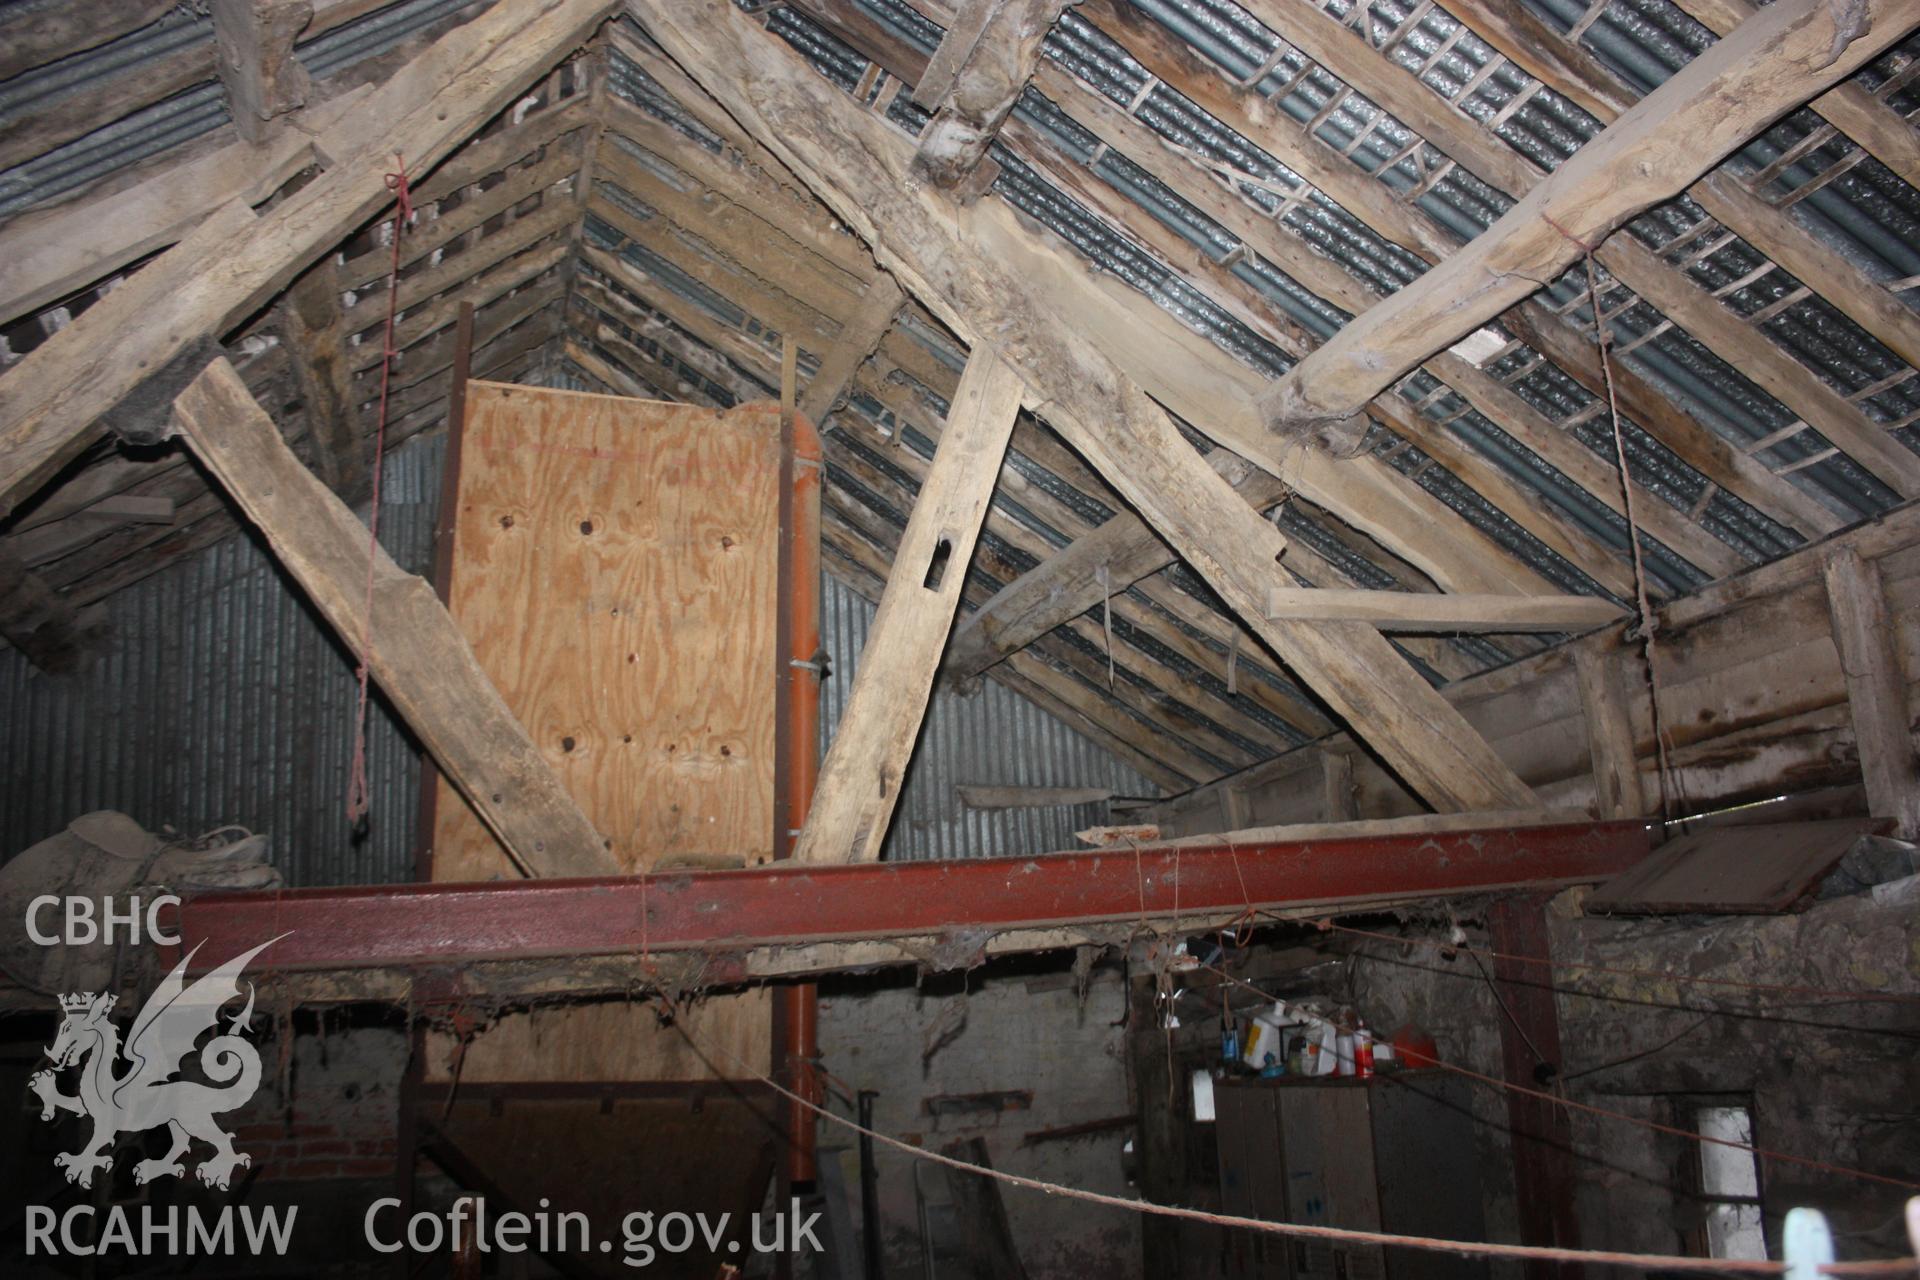 Interior view of barn or shed at Glanhafon-Fawr Farmstead showing timber frame with metal supports and a corrugated iron roof. Photographic survey of Glanhafon-Fawr Farmstead conducted by Geoff Ward on 4th November 2010.